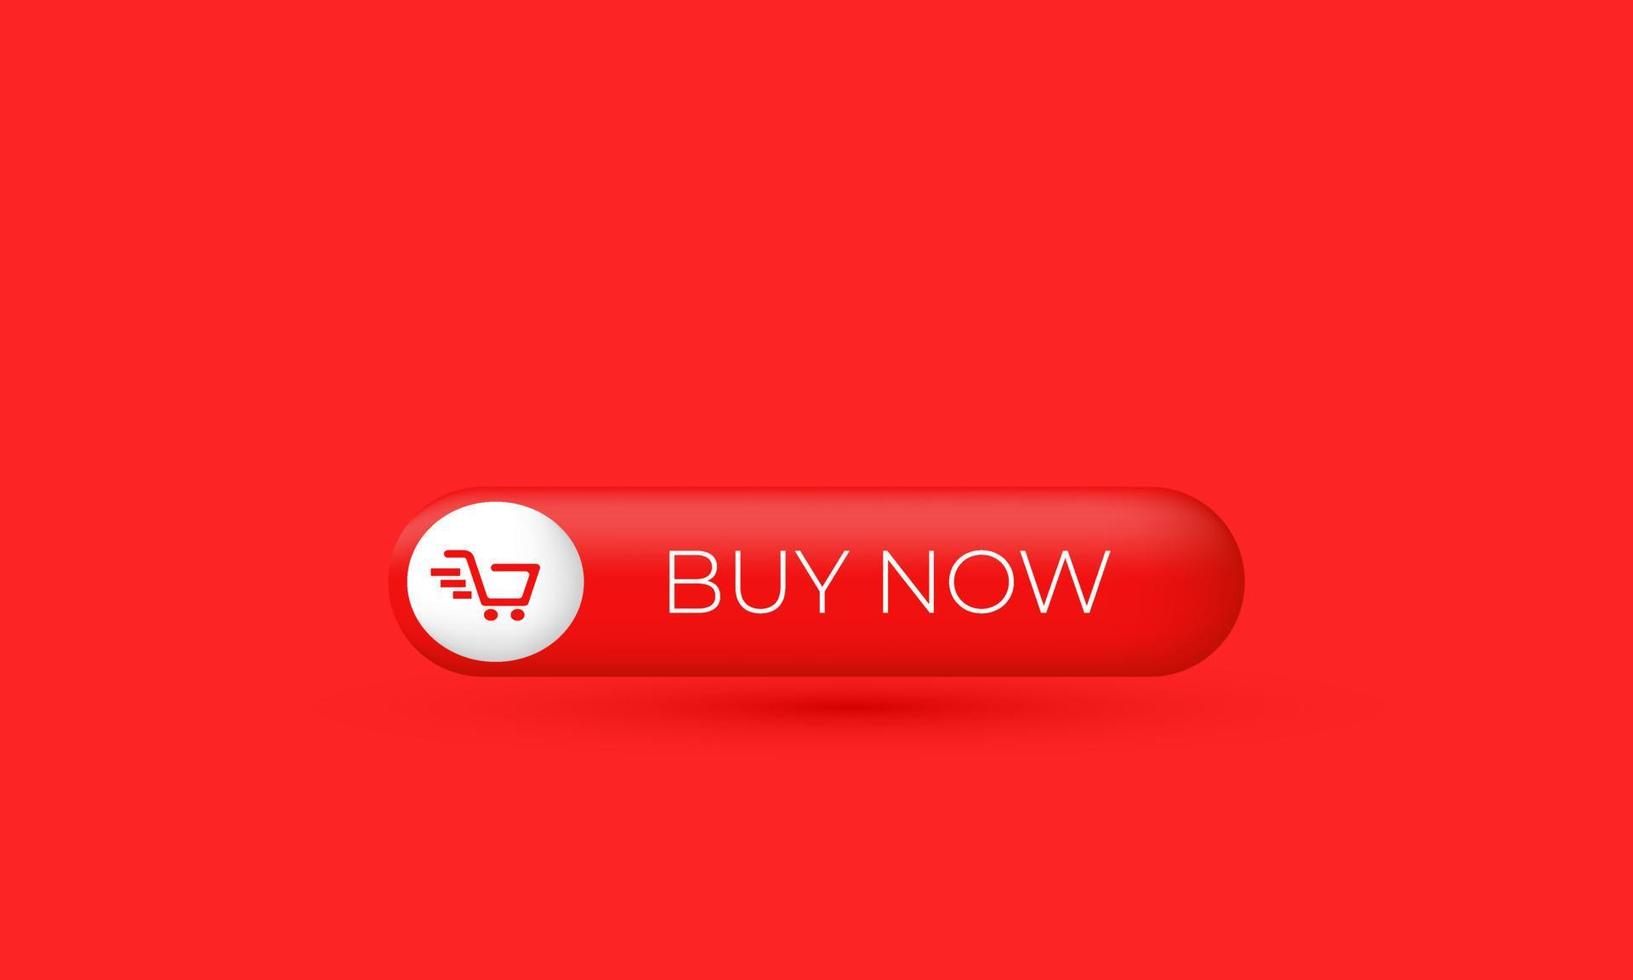 3d realistic cartoon vector red button buy now icon trendy modern style object symbols isolated on background